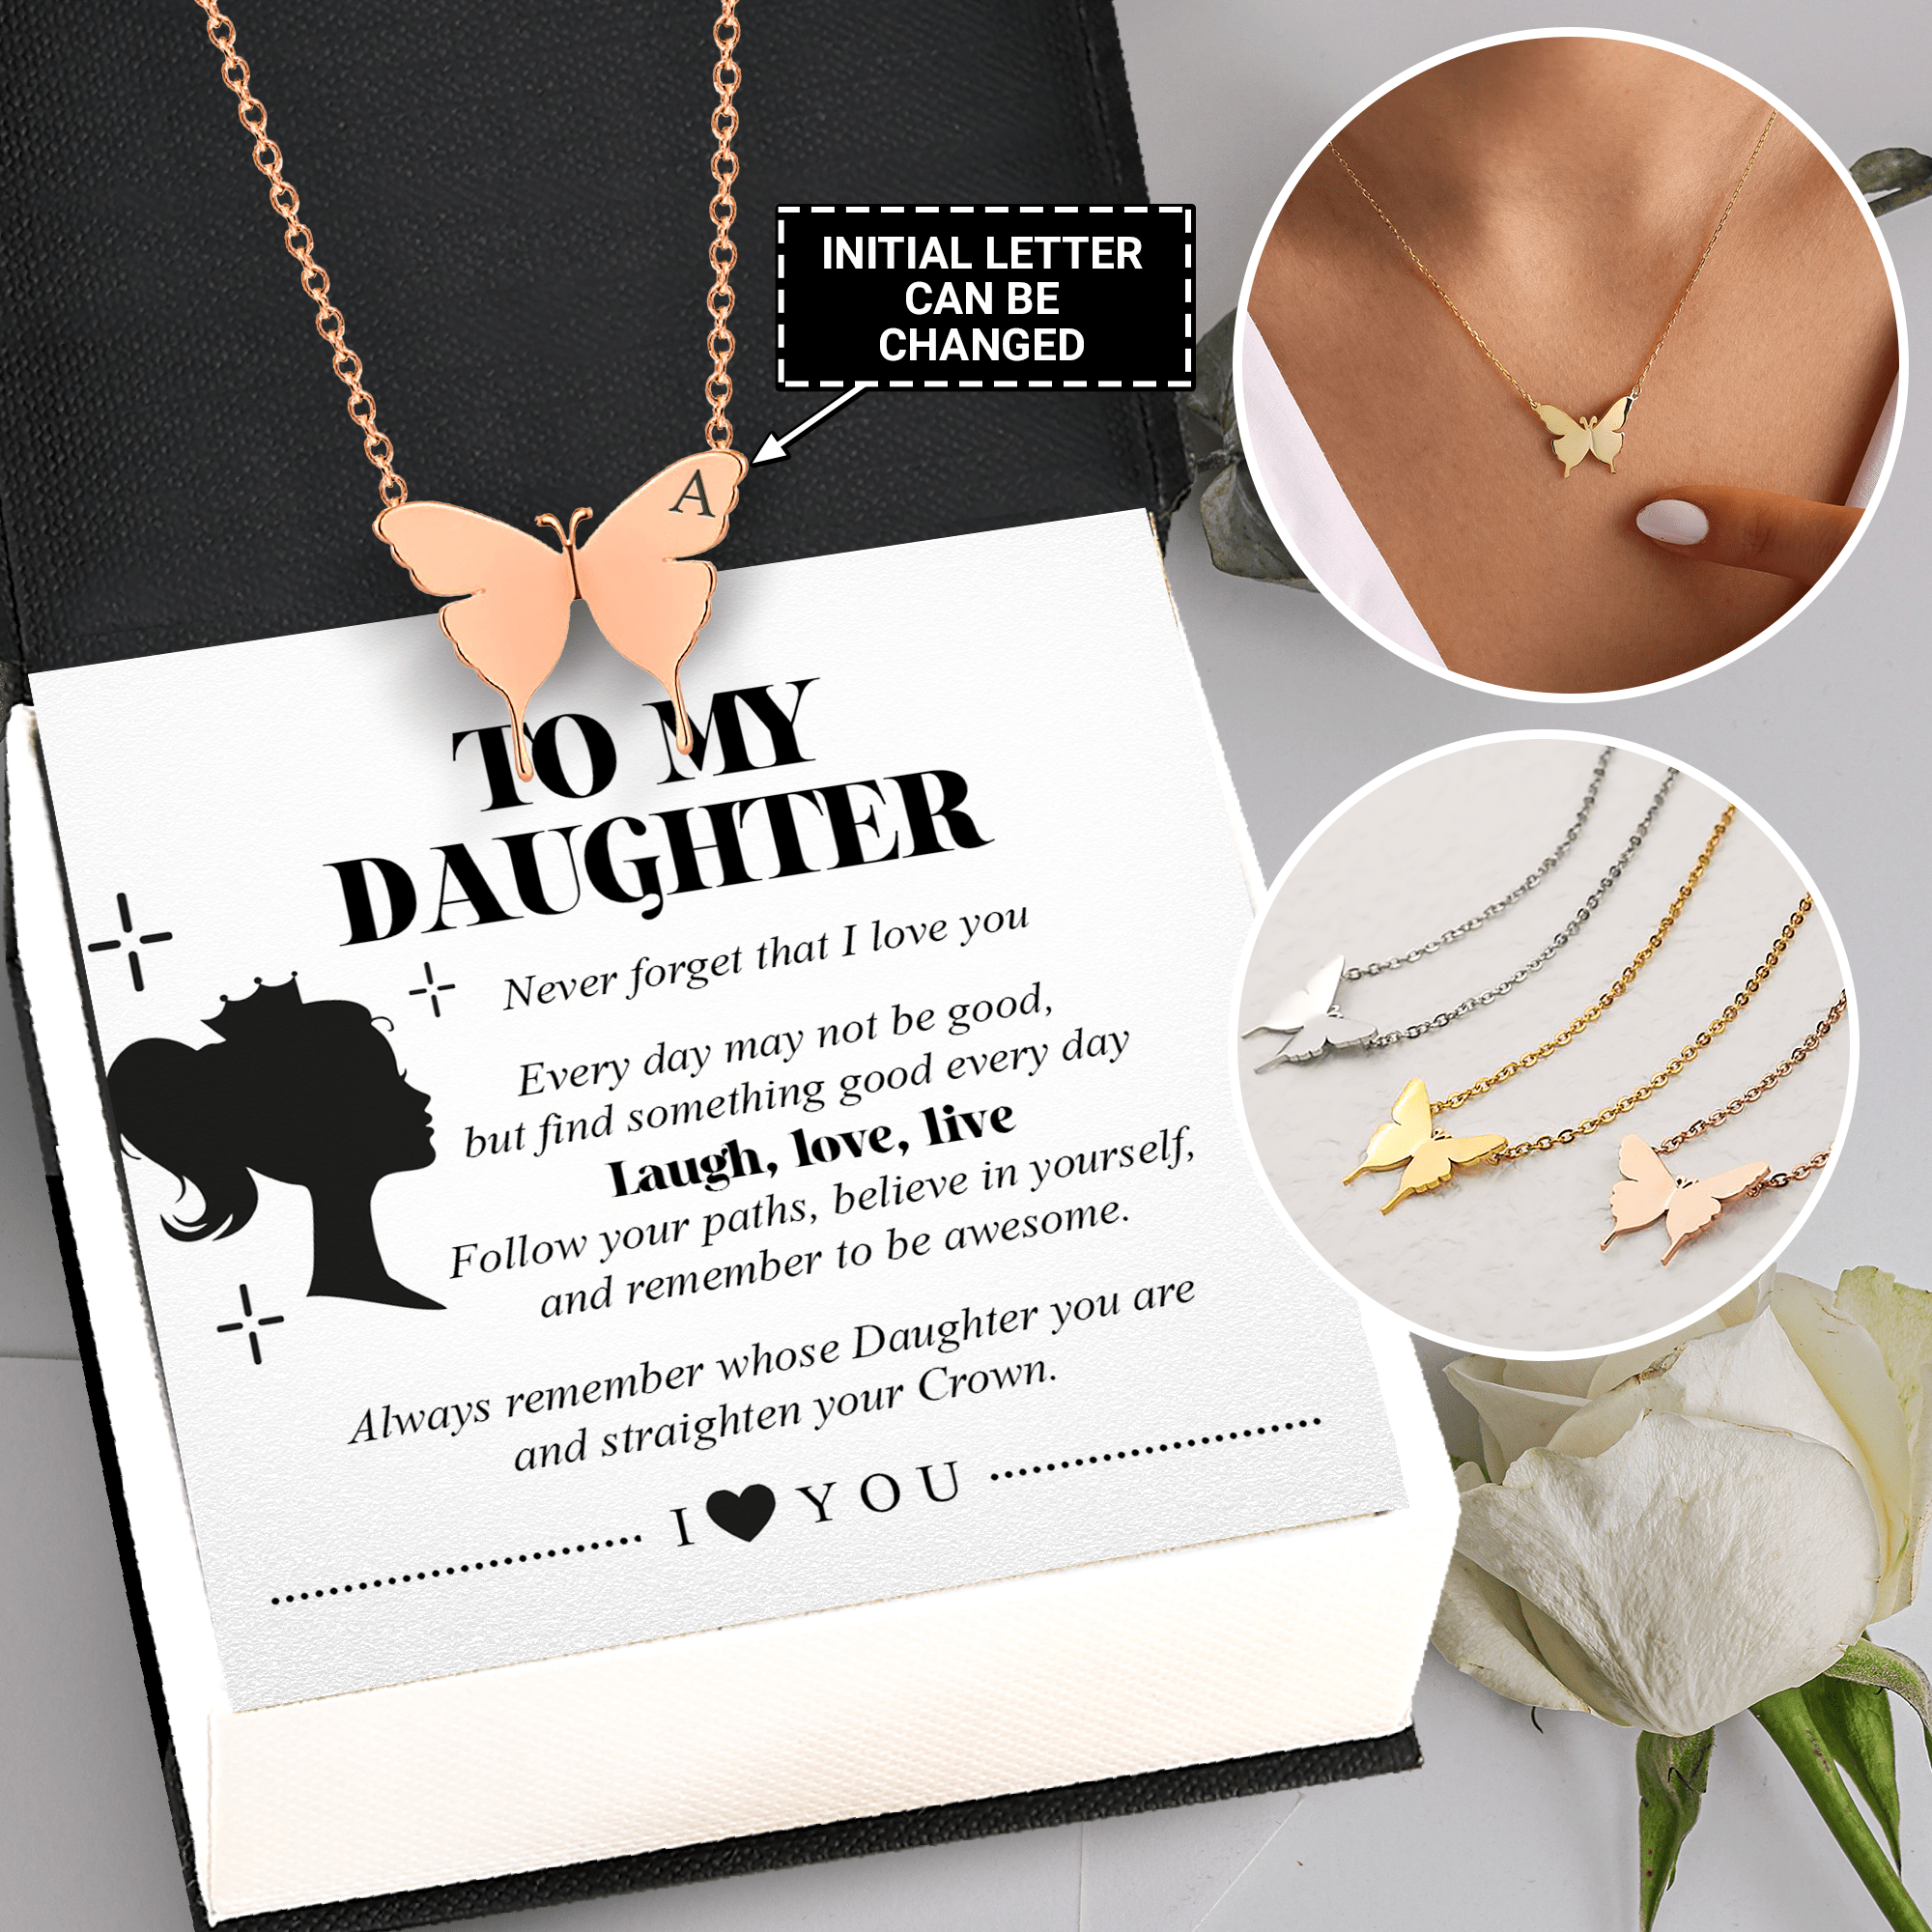 Personalized Butterfly Necklace - Family - To My Daughter - Never Forget That I Love You - Gncn17003